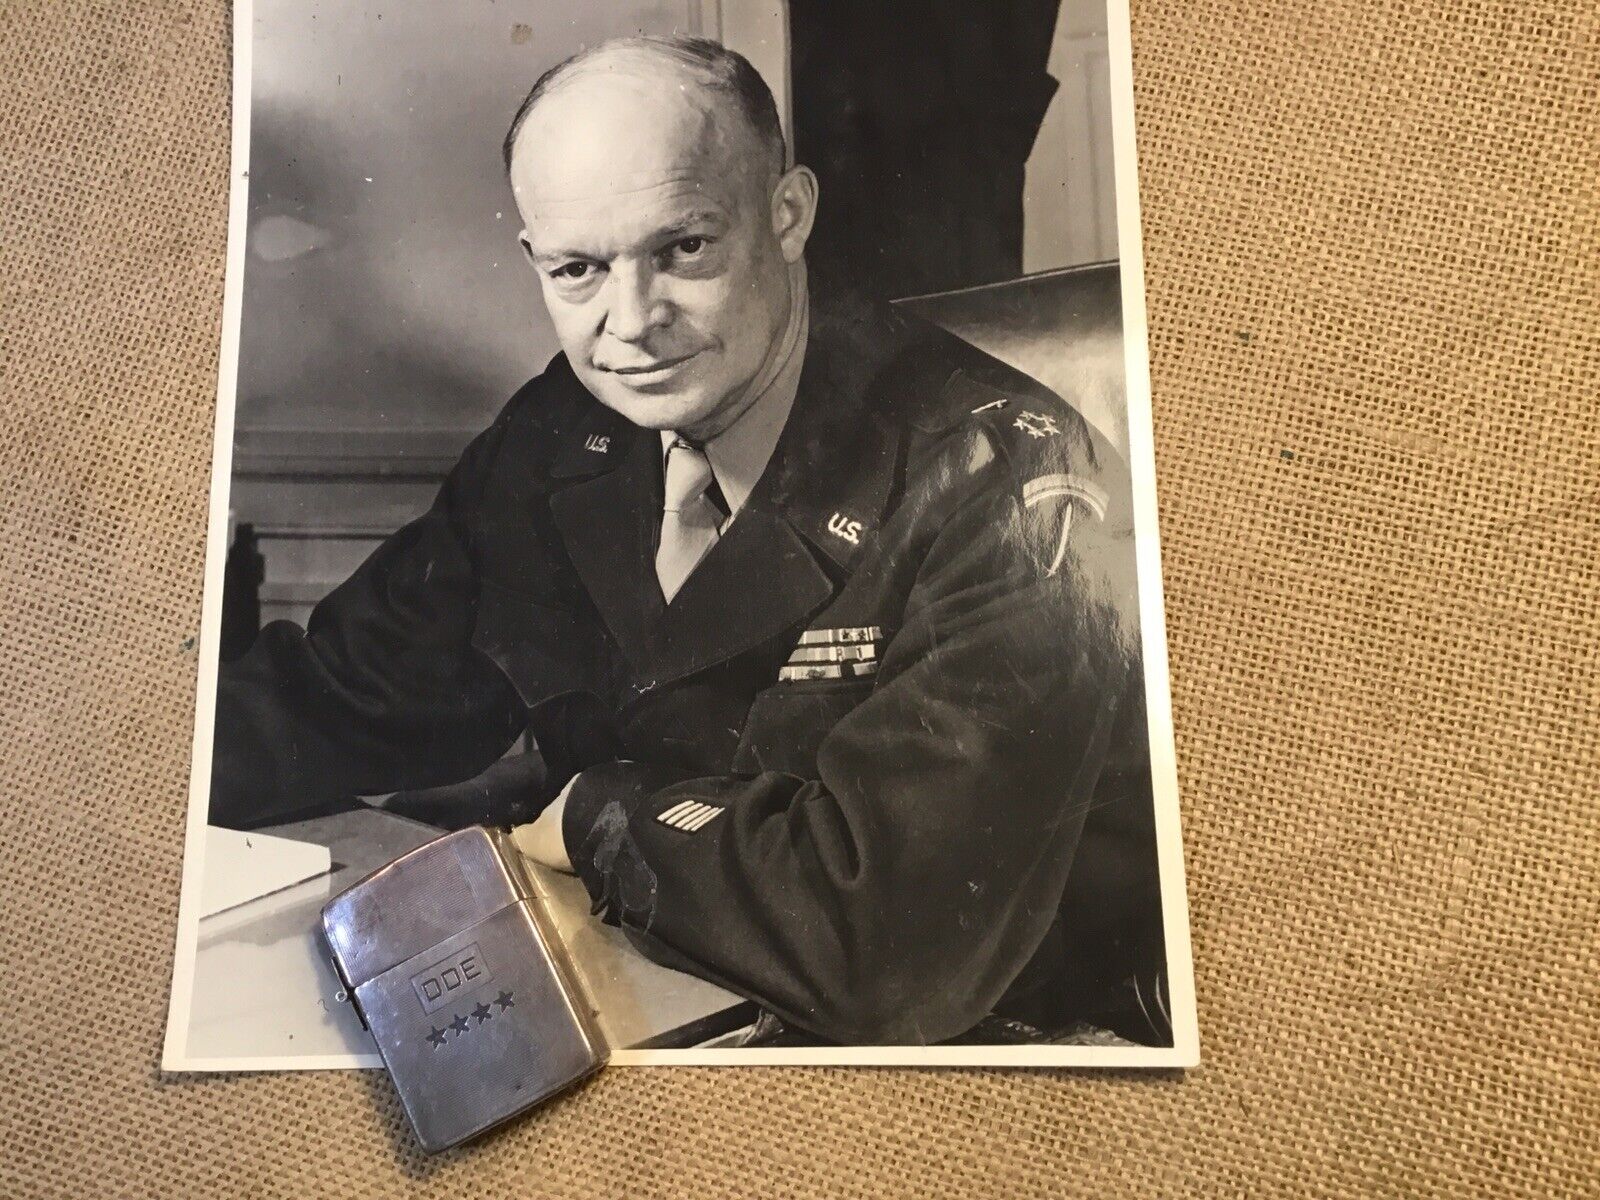 GEN DWIGHT EISENHOWER'S PERSONAL 4 STAR STERLING ZIPPO LIGHTER FROM WWII - D-DAY